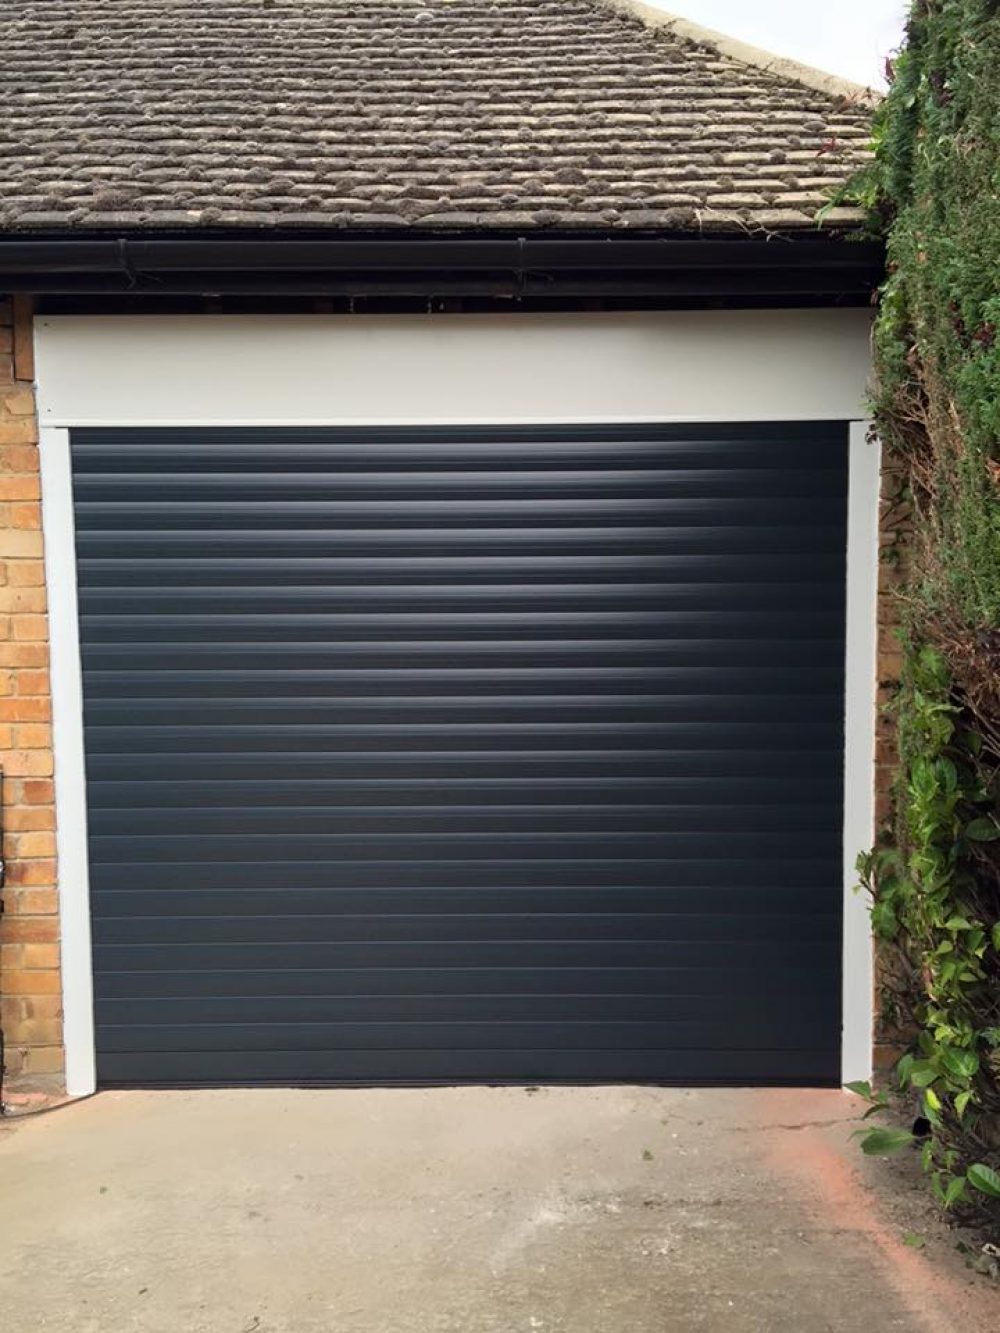 Seceuroglide Roller Garage Door in Anthracite fitted by Shutter Spec Security in Thame.